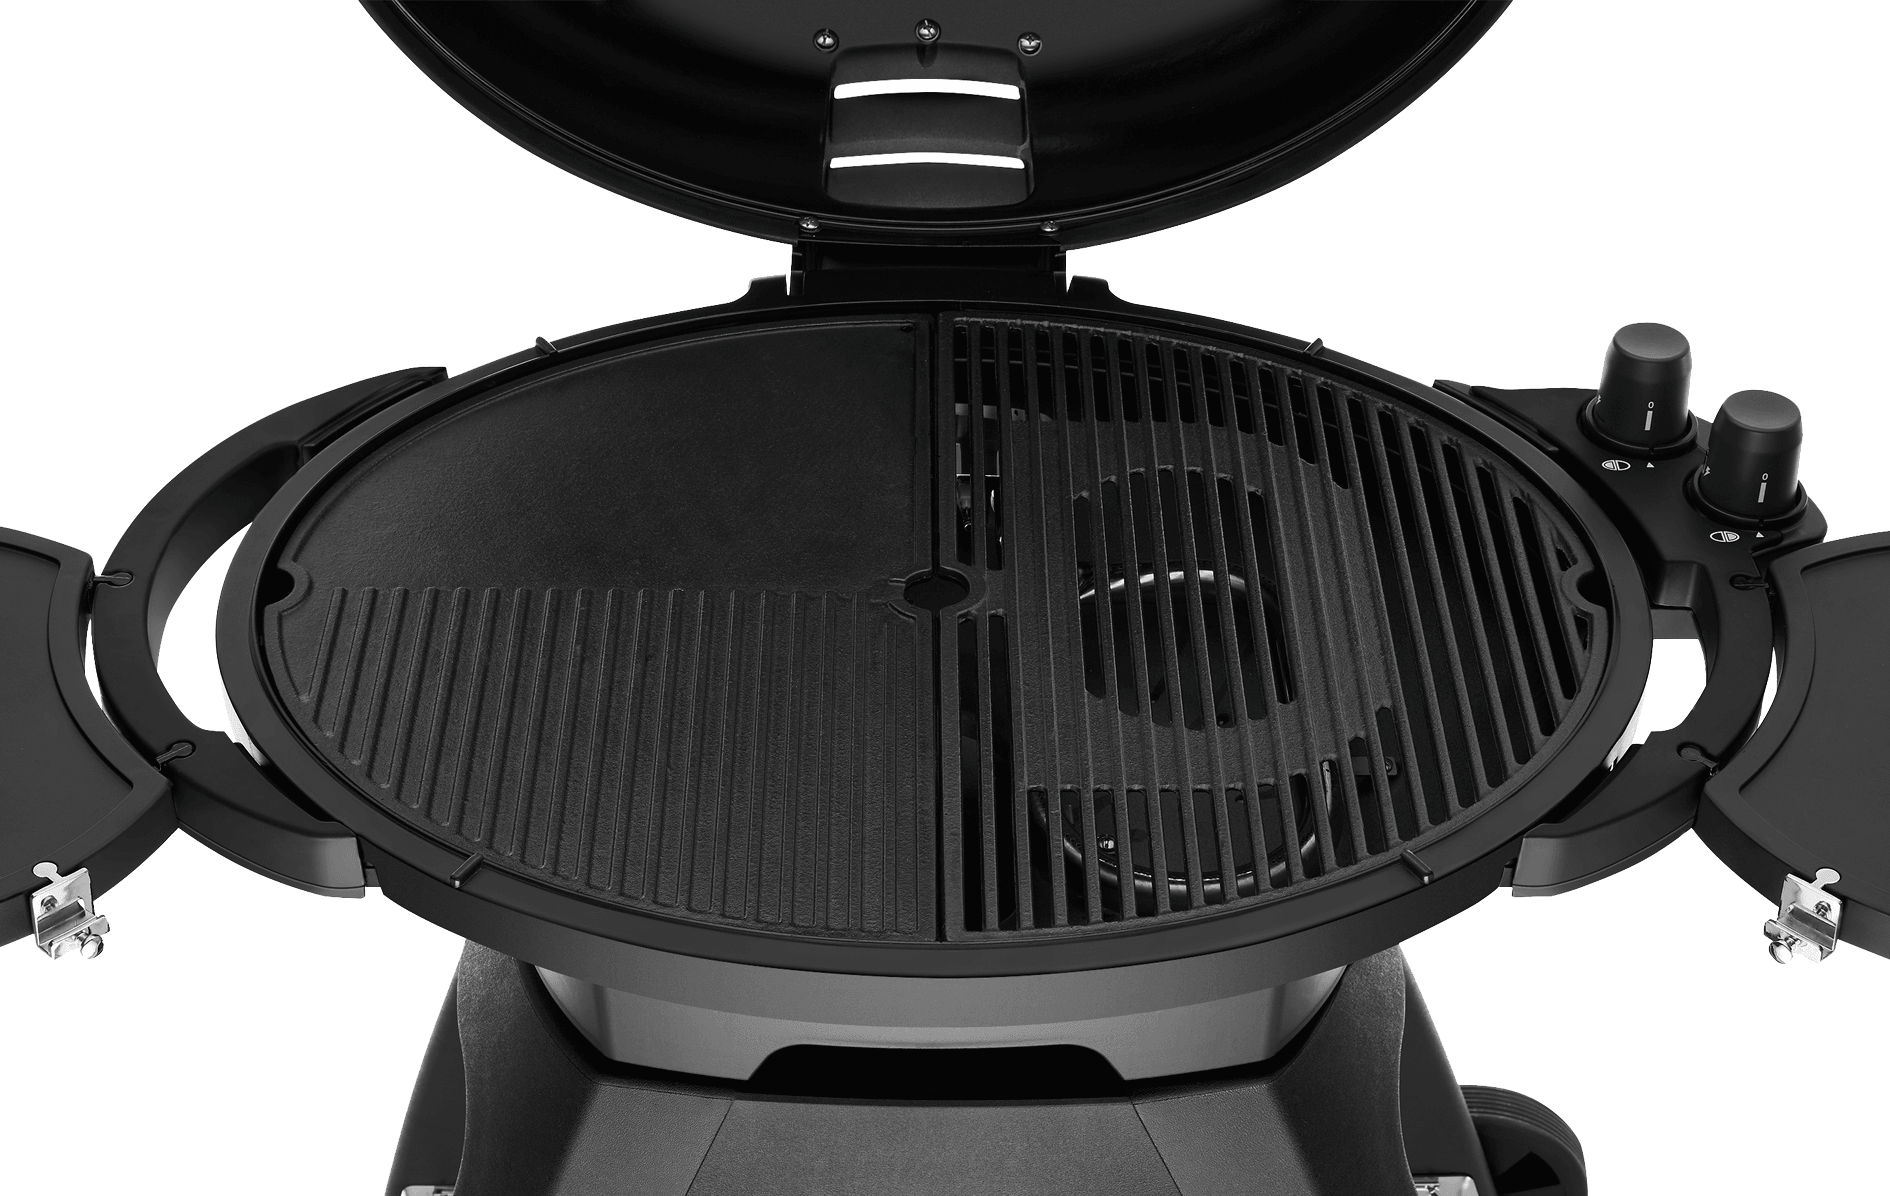 Beefeater BIGG BUGG Black Mobile BBQ with Stand - Joe's BBQs